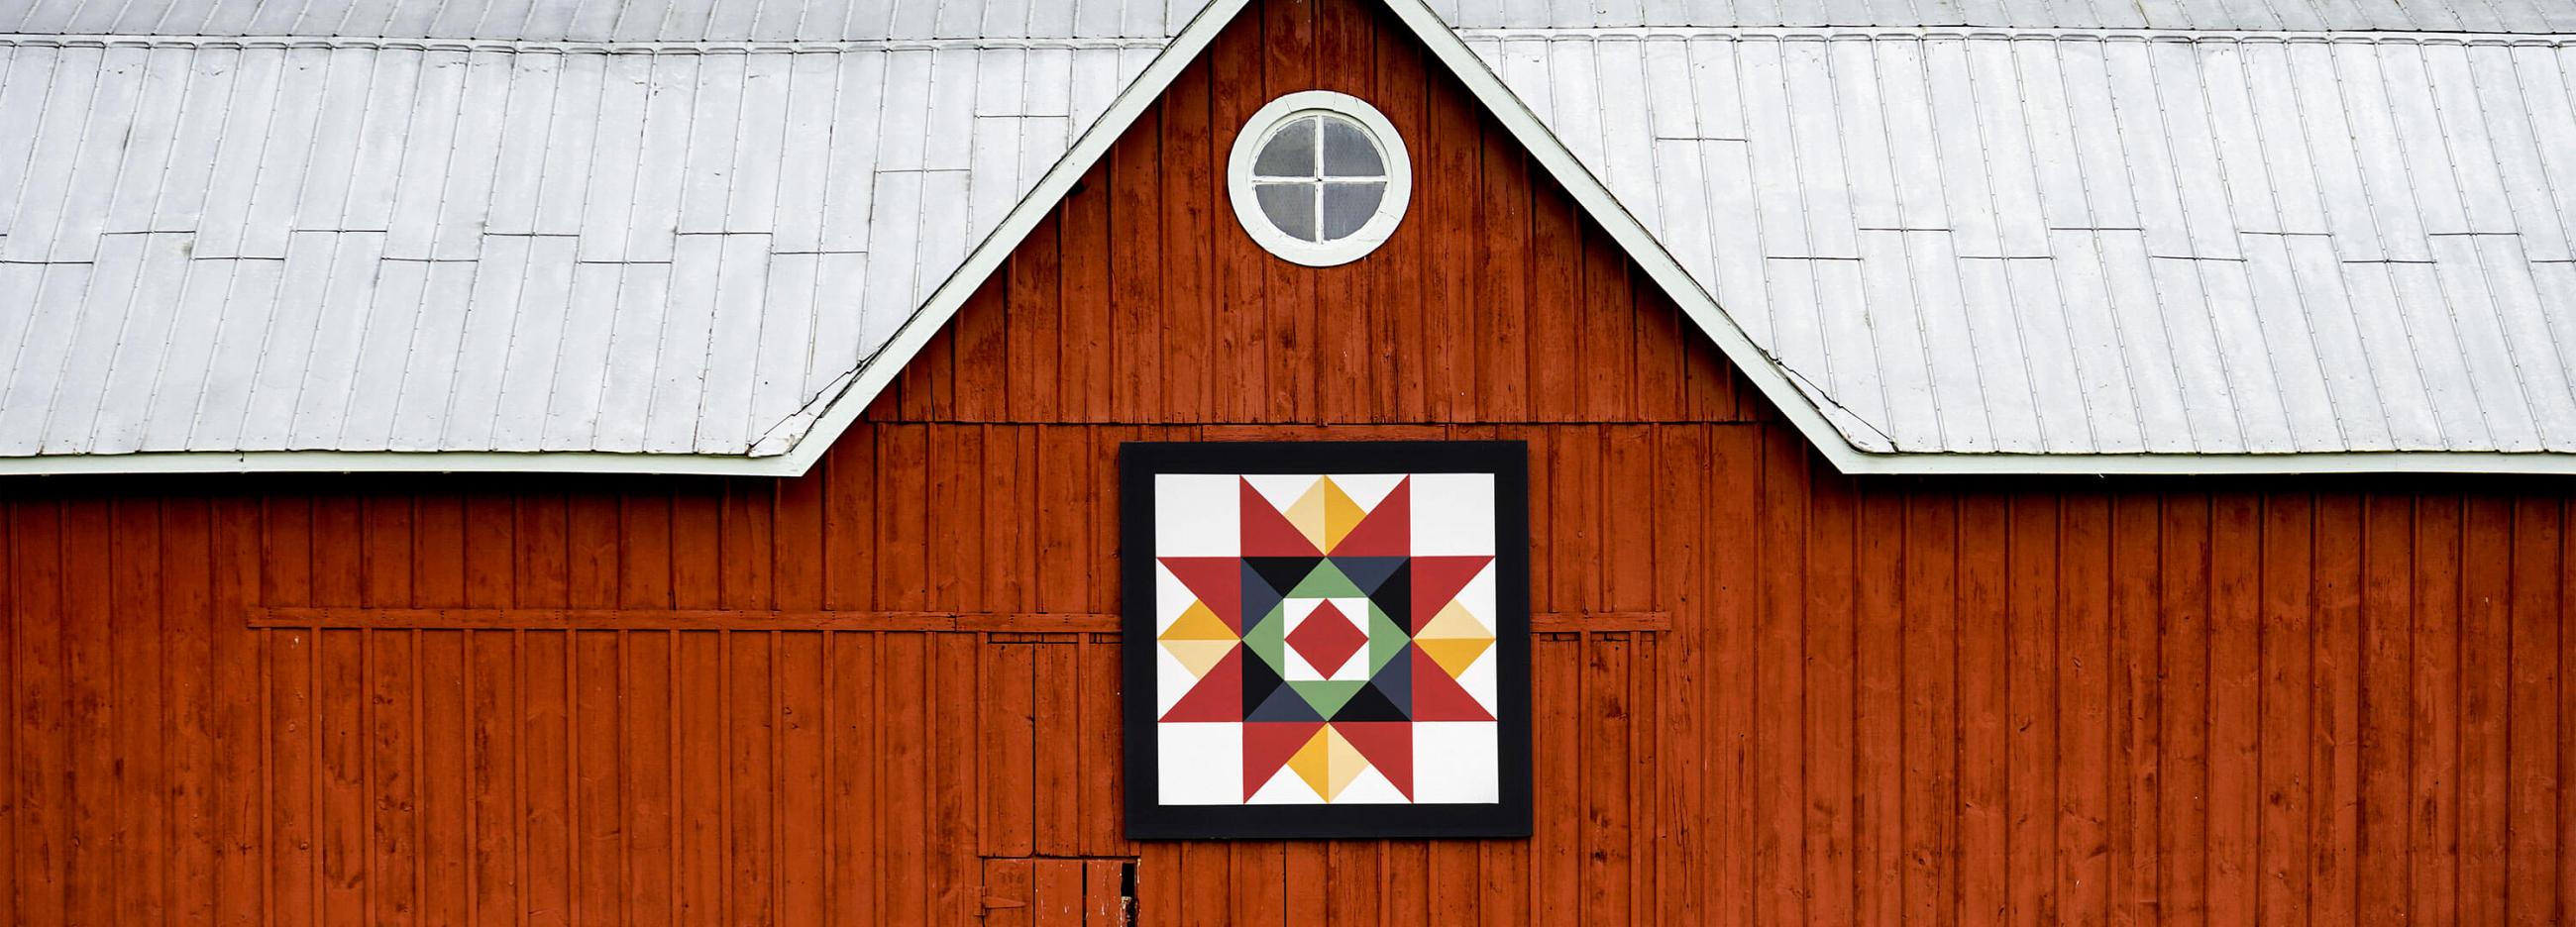 Patchwork Designs Hand Painted Barn Quilt